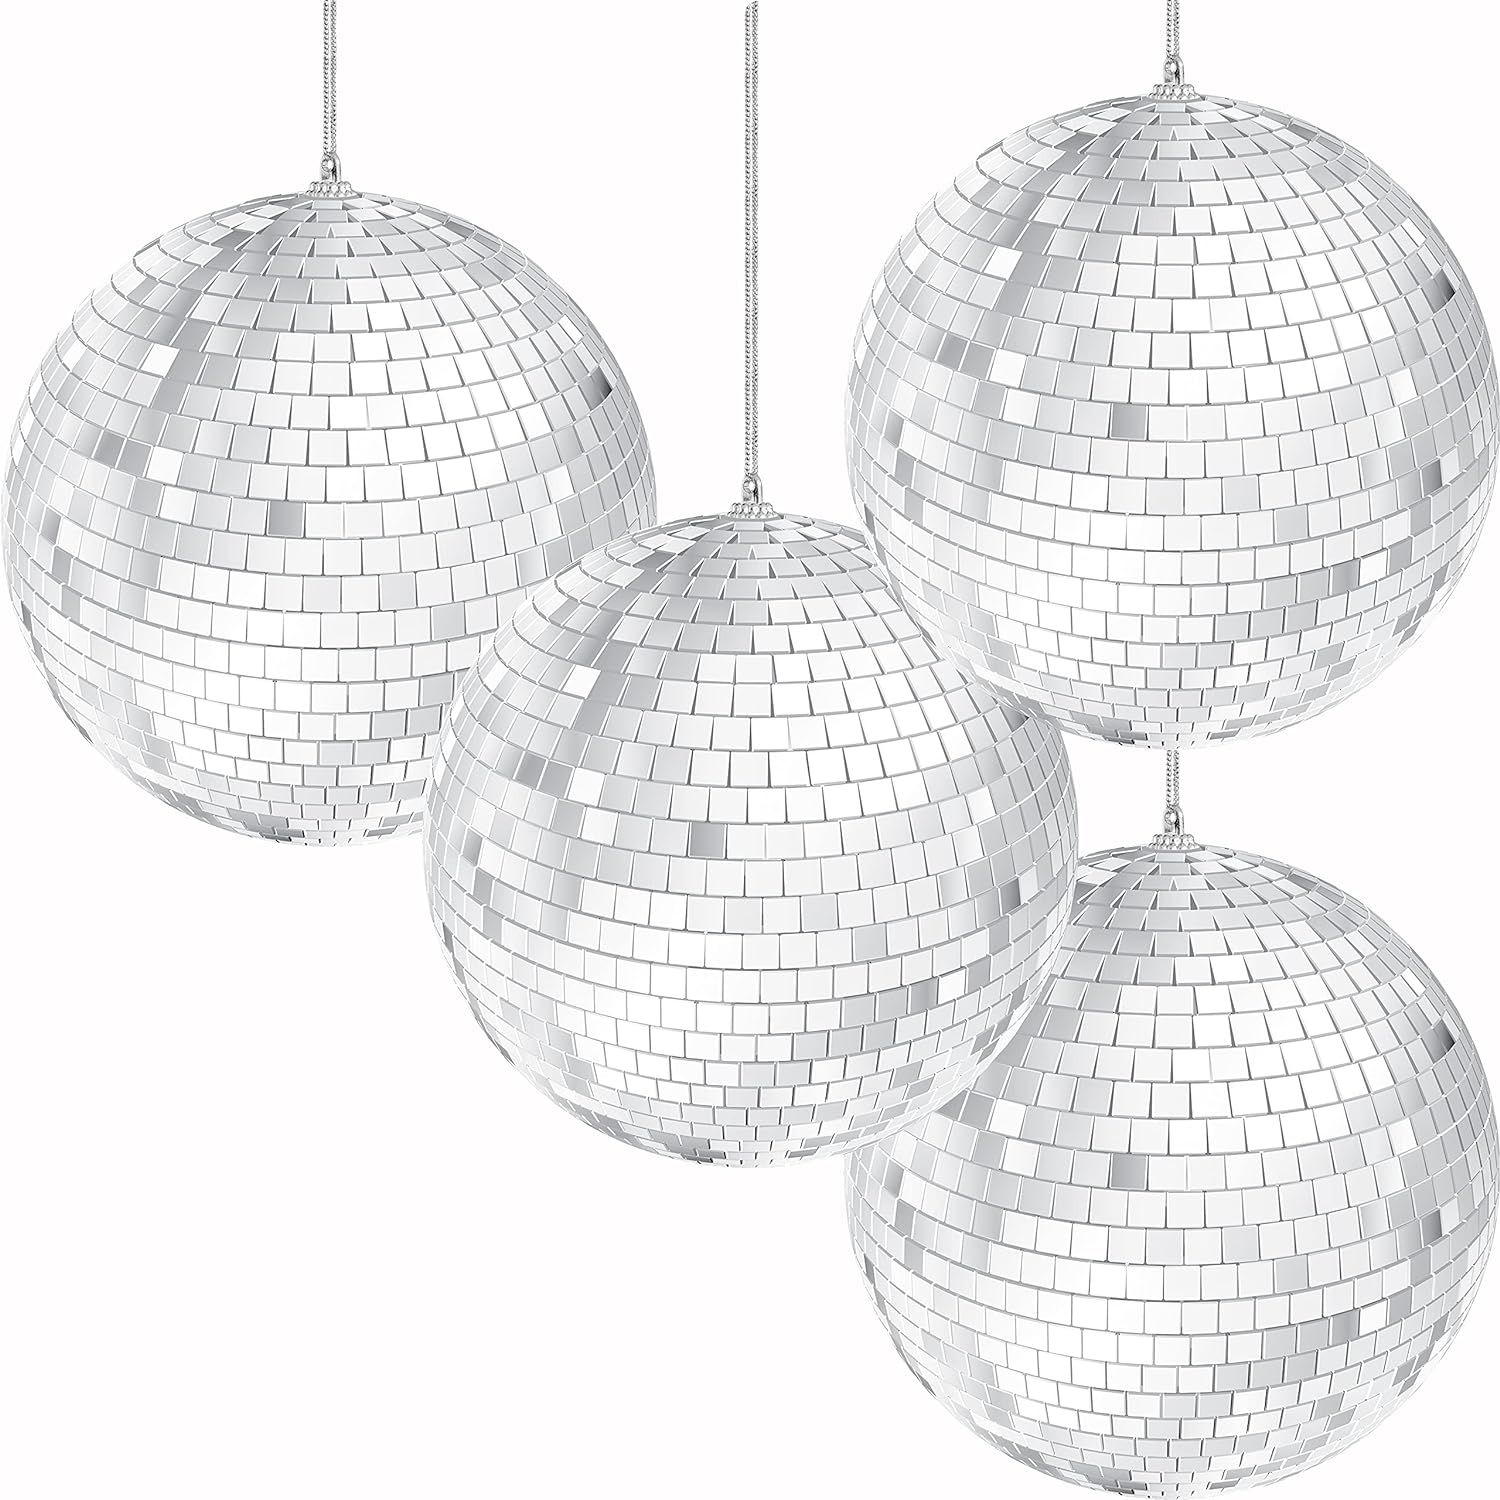 Must-Have New Year’s Decor For A Sparkly Celebration